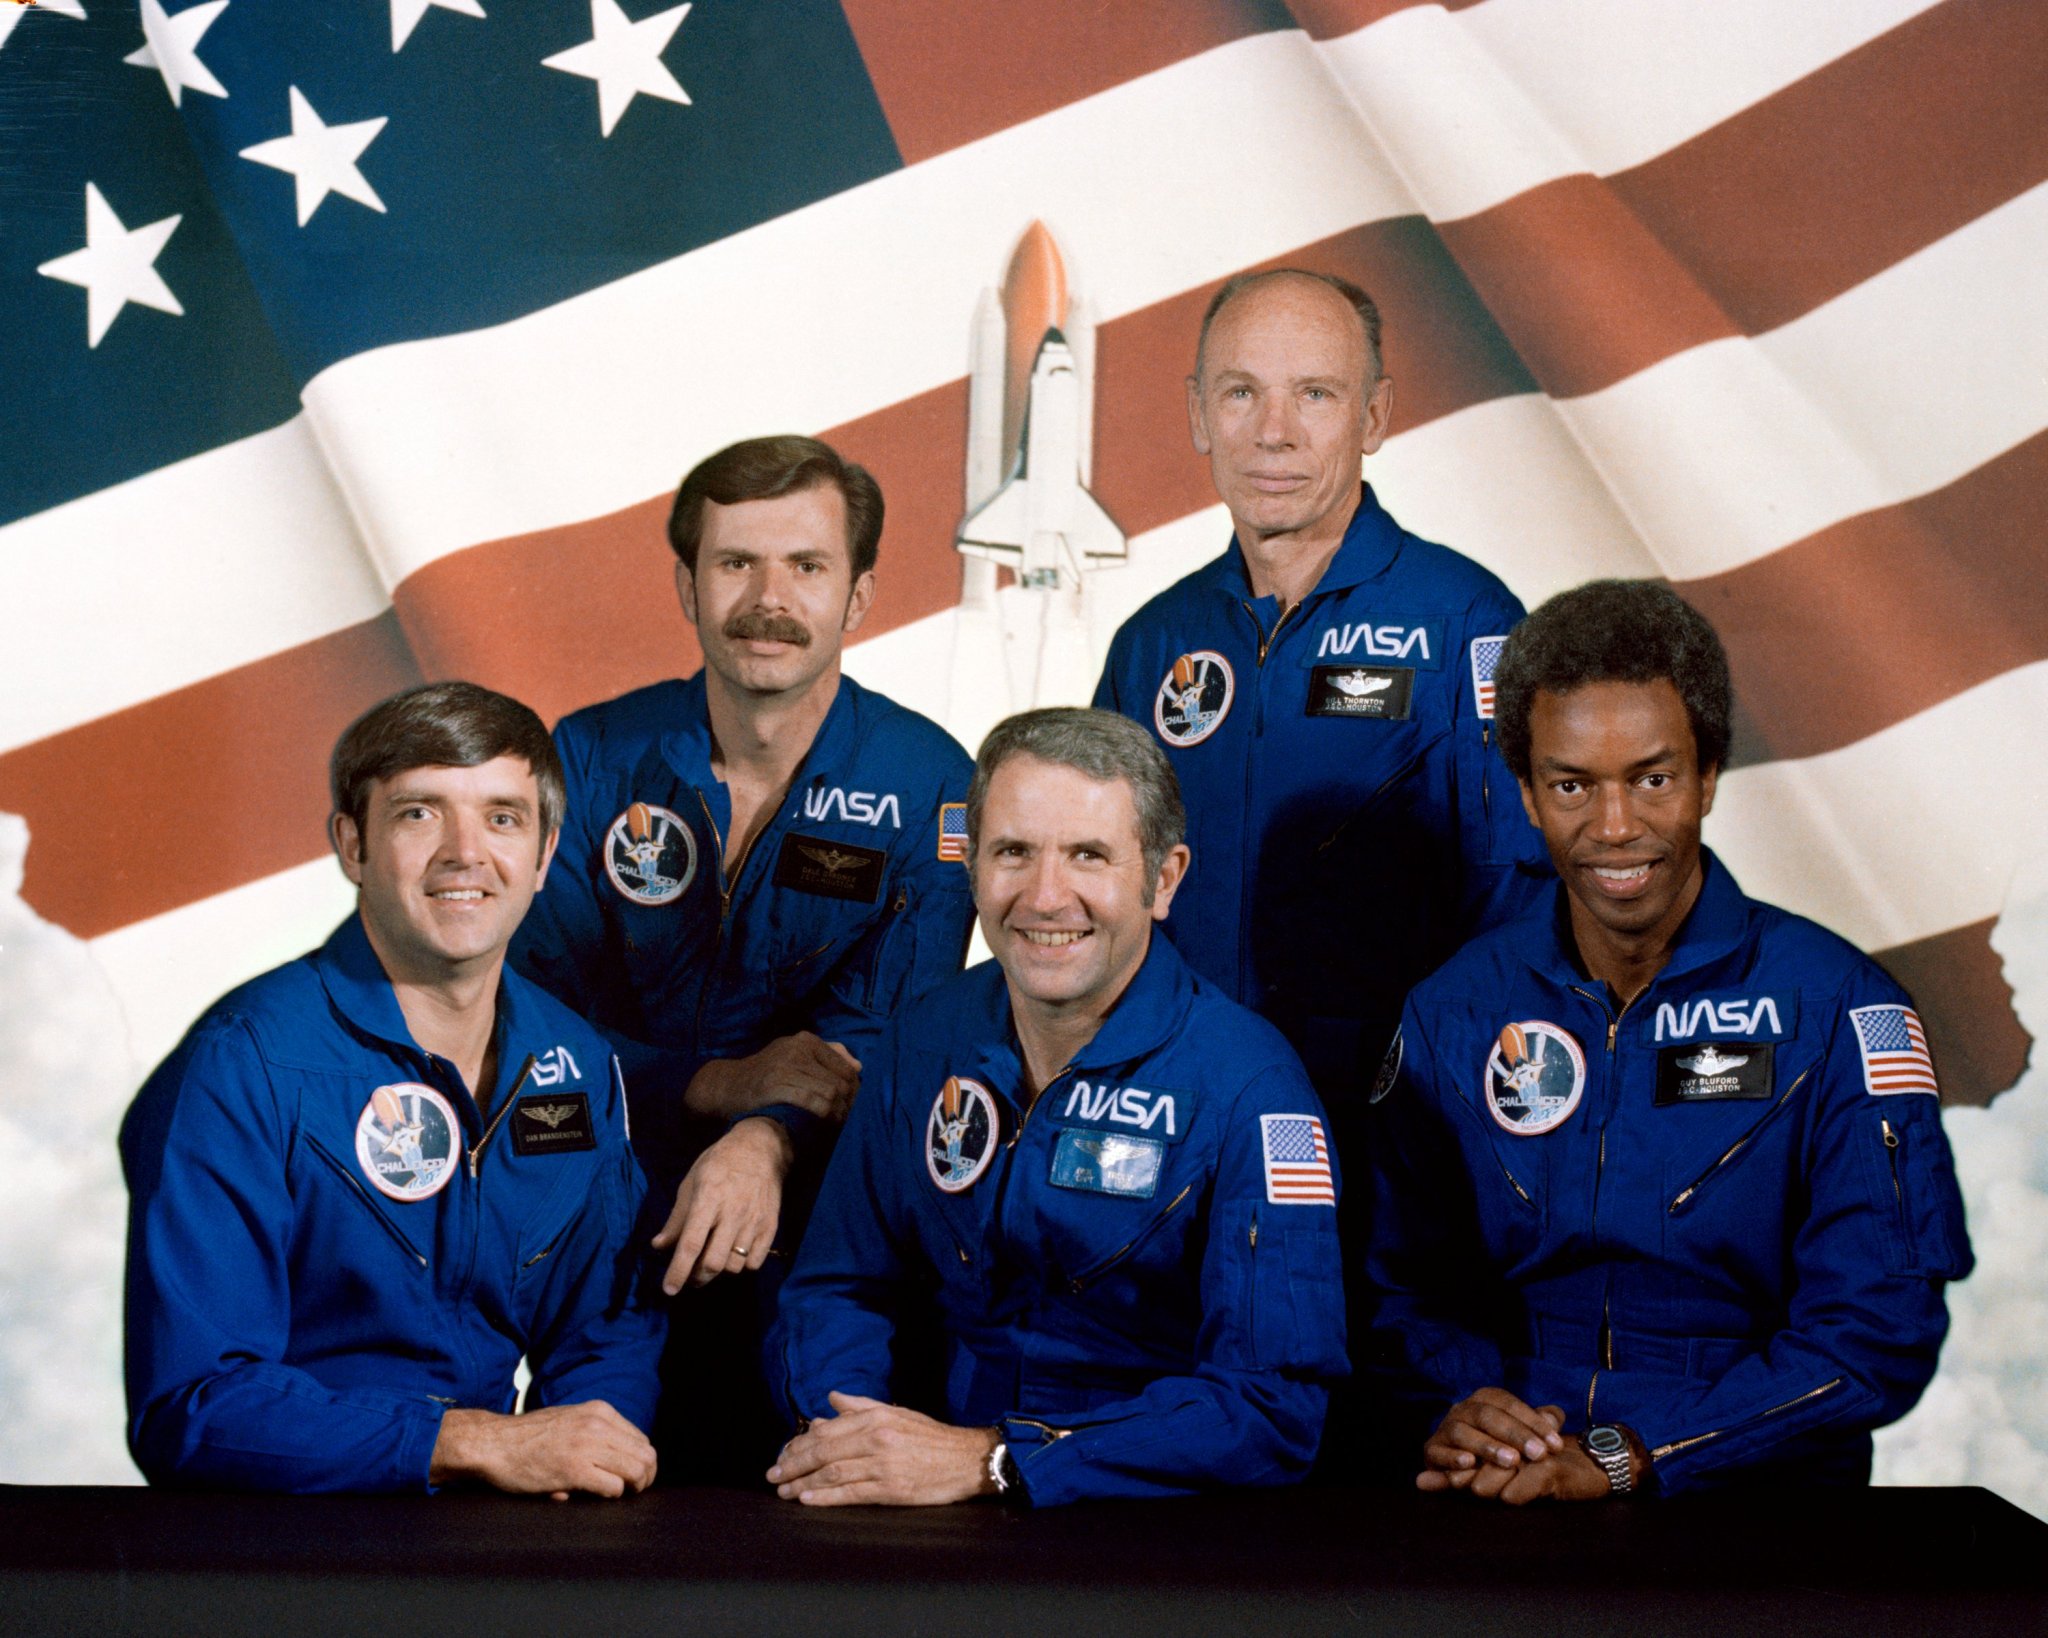 A picture of the STS-8 crew showing five astronauts in blue flight suits